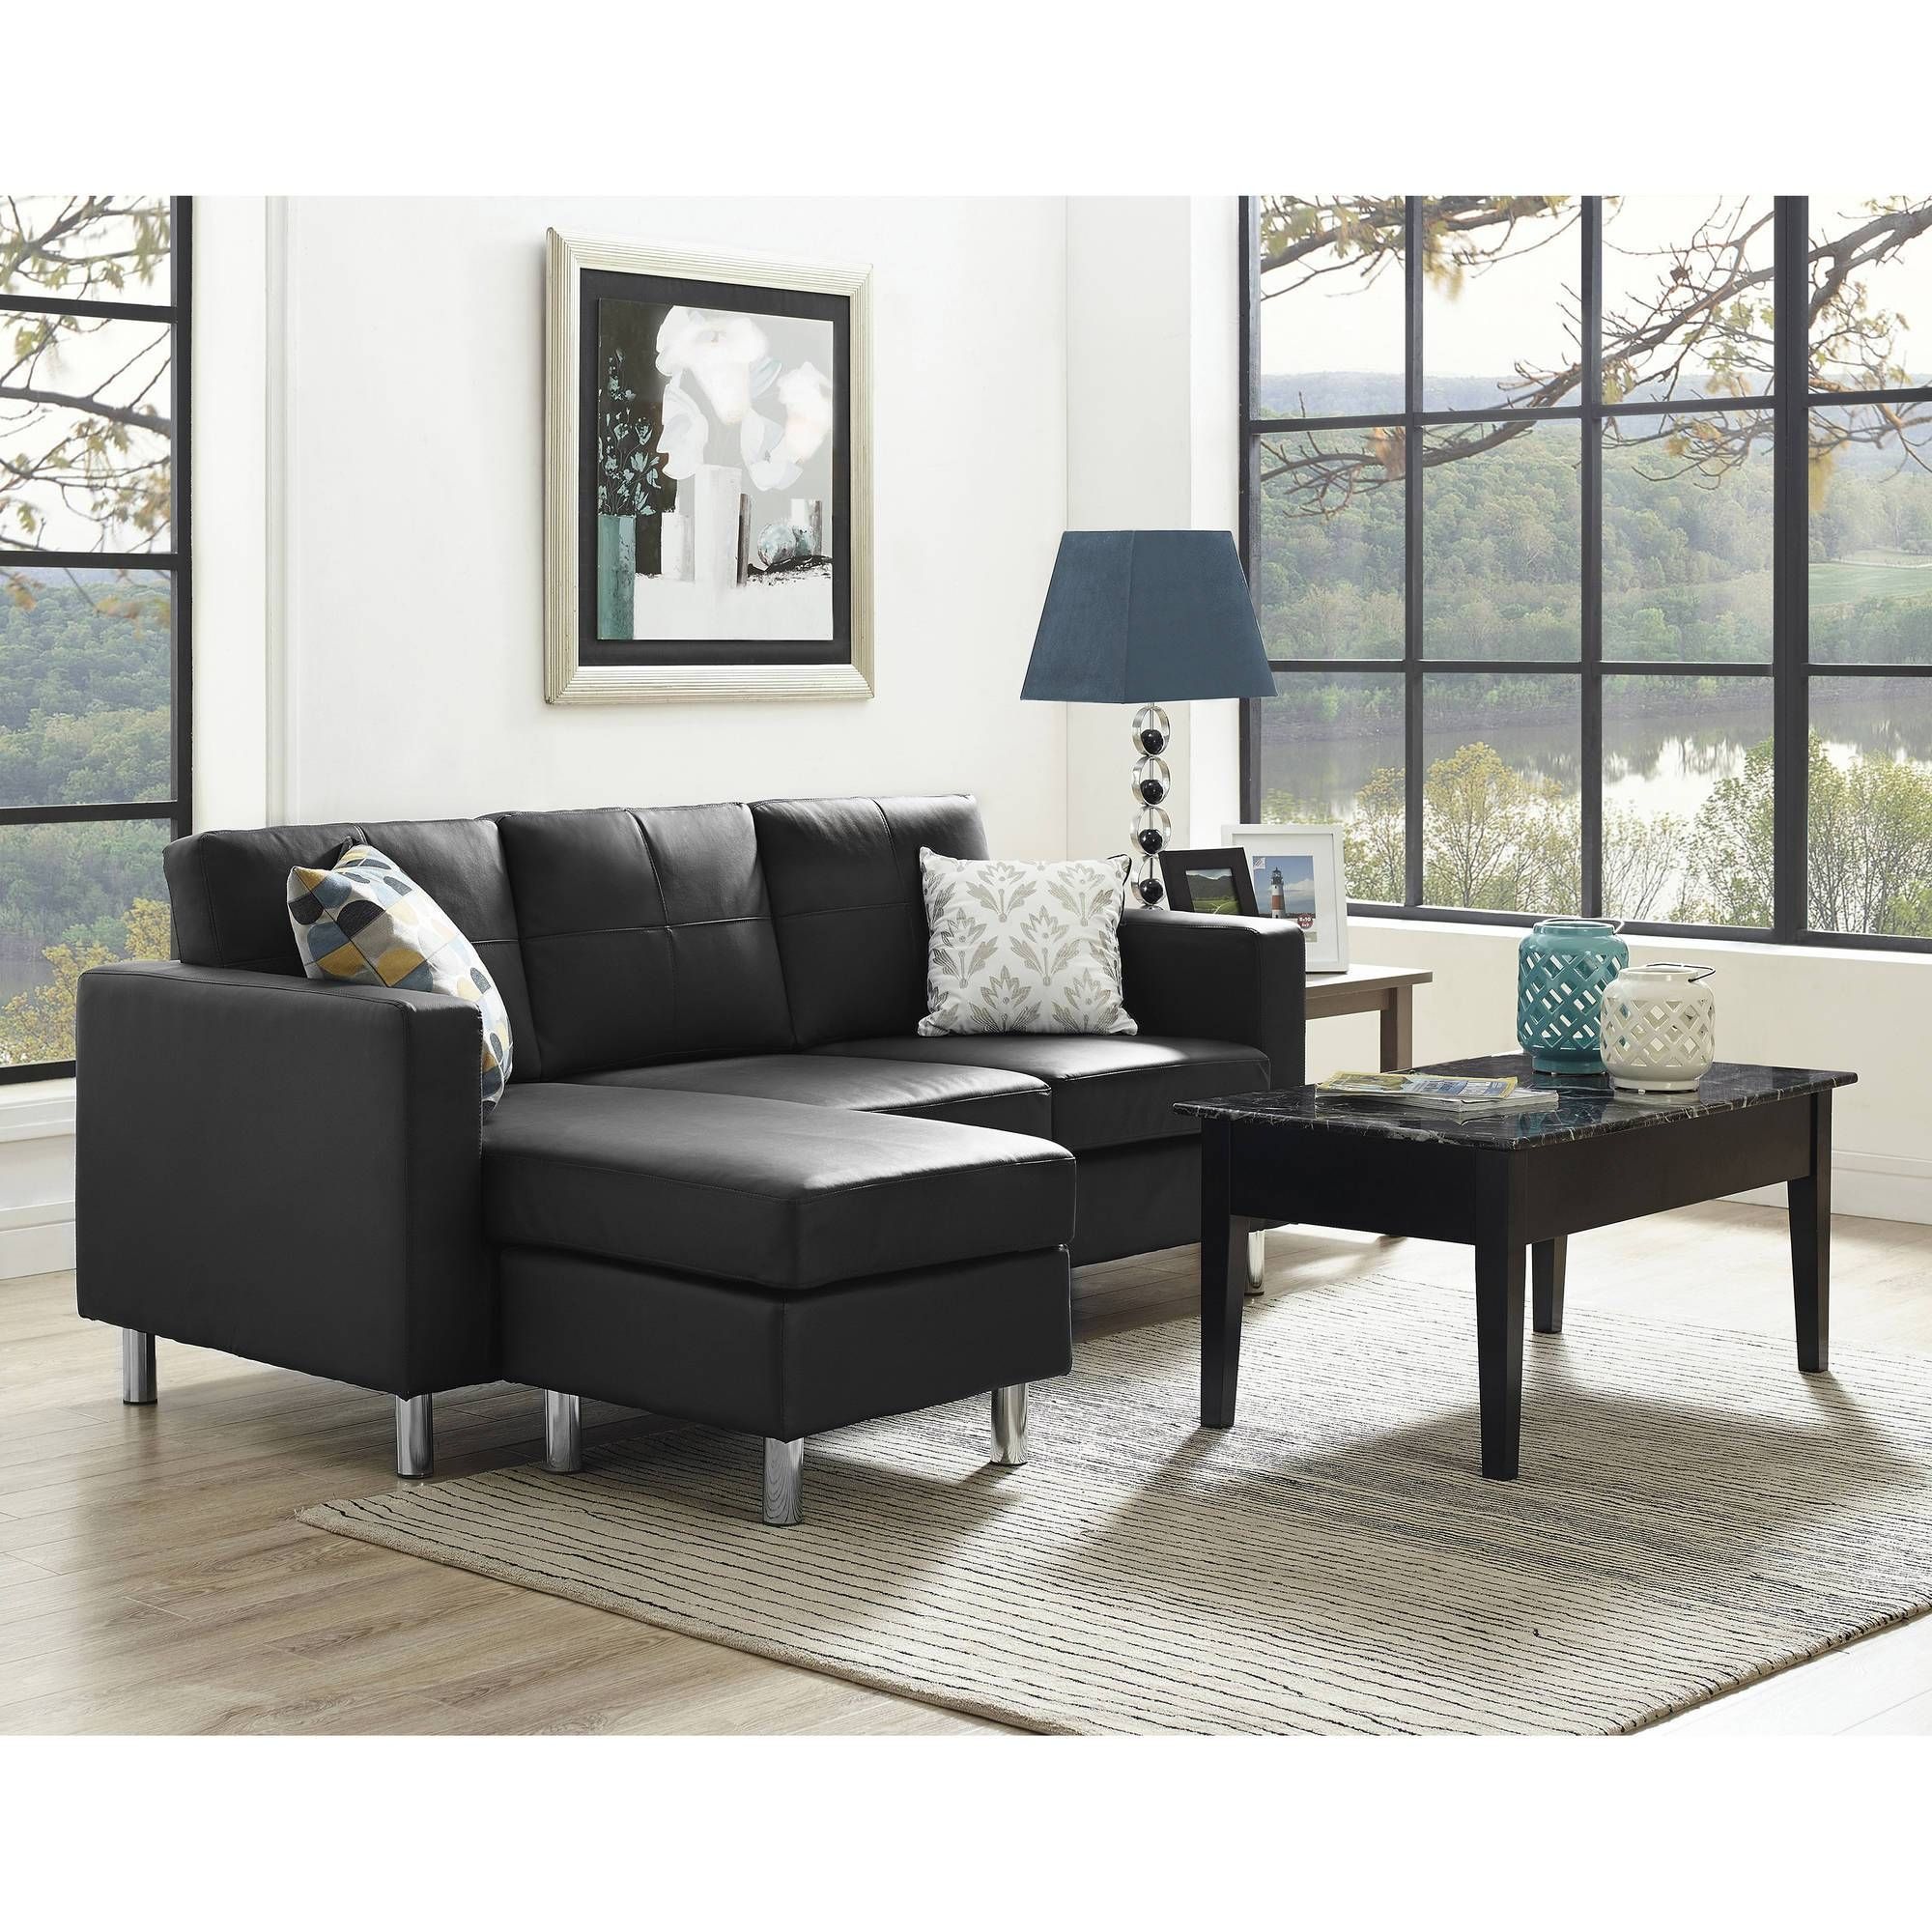 Beautiful Sectional Sofa For Small Space 66 For Cozy Sectional Regarding Cozy Sectional Sofas (Photo 22 of 30)